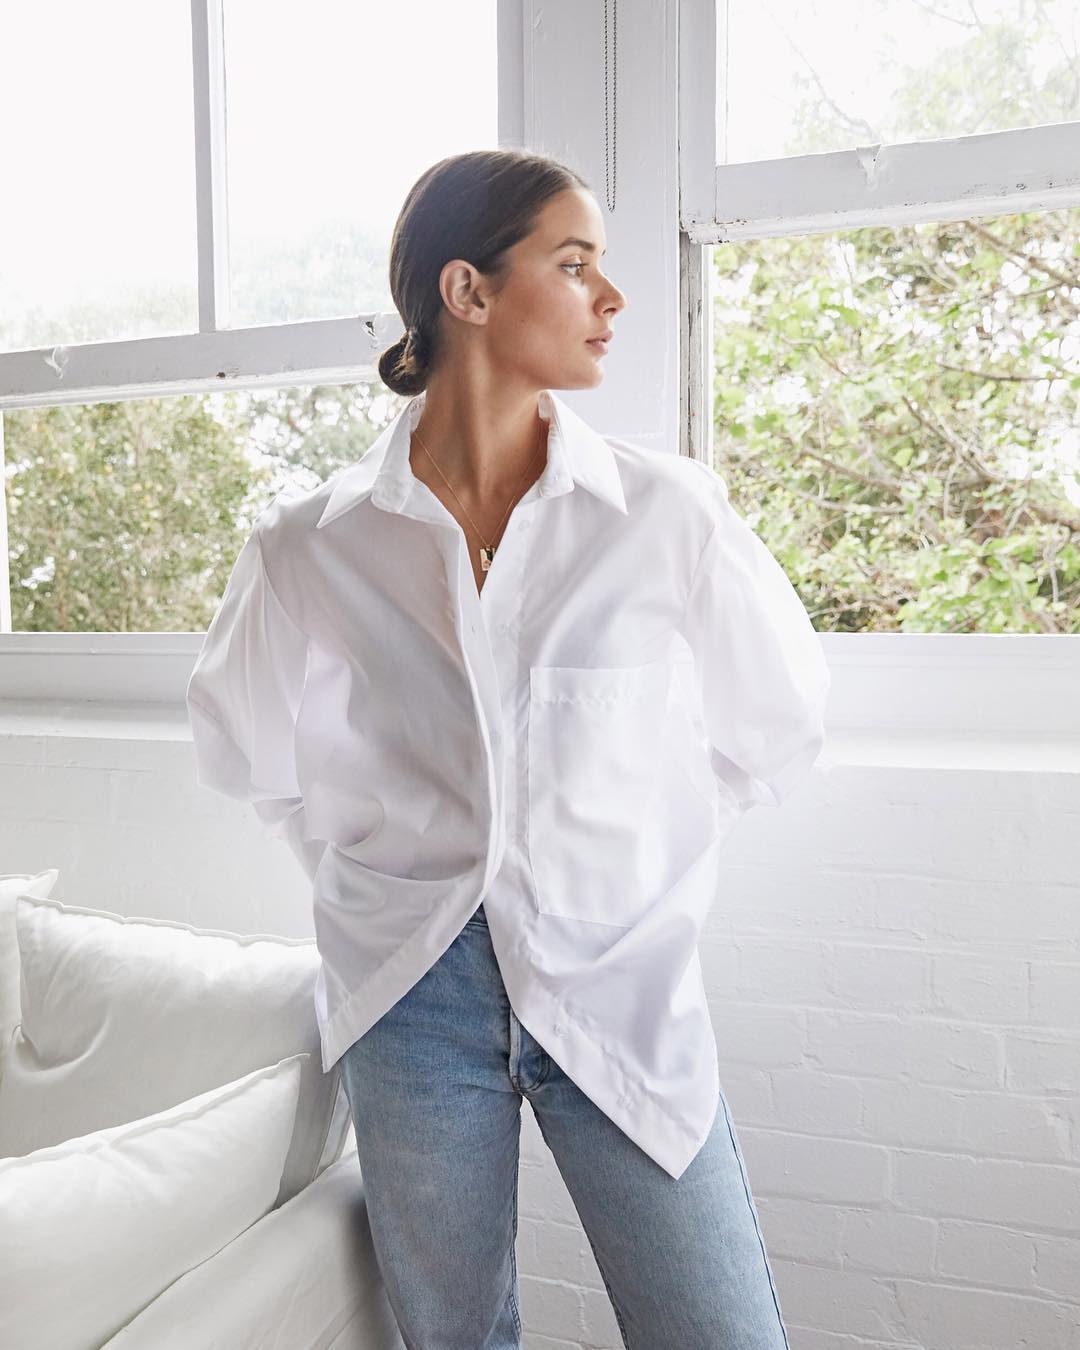 15 Crisp White Button-Down Shirts You Can Wear Year-Round — Harper & Harley with a low bun, white top, and jeans